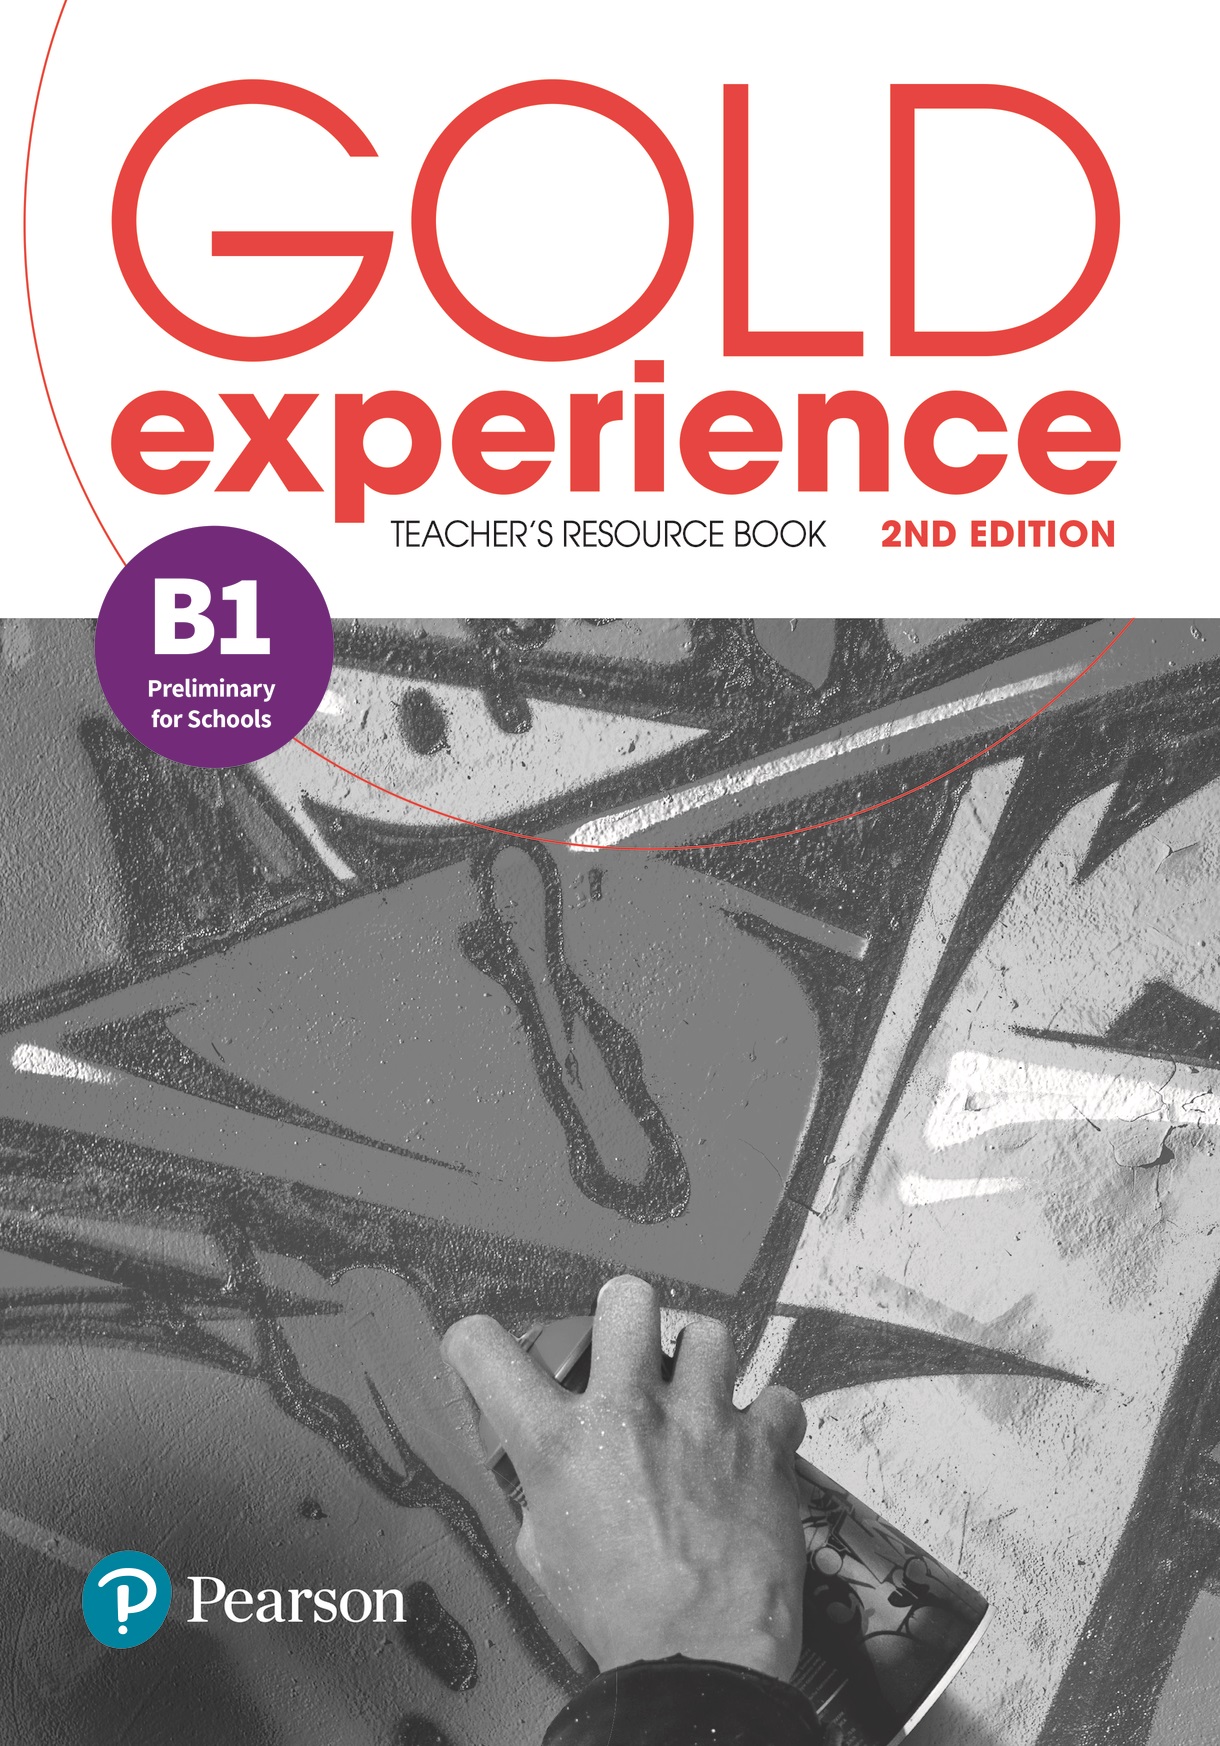 Gold Experience 2nd Edition B1. Teacher's Resource Book